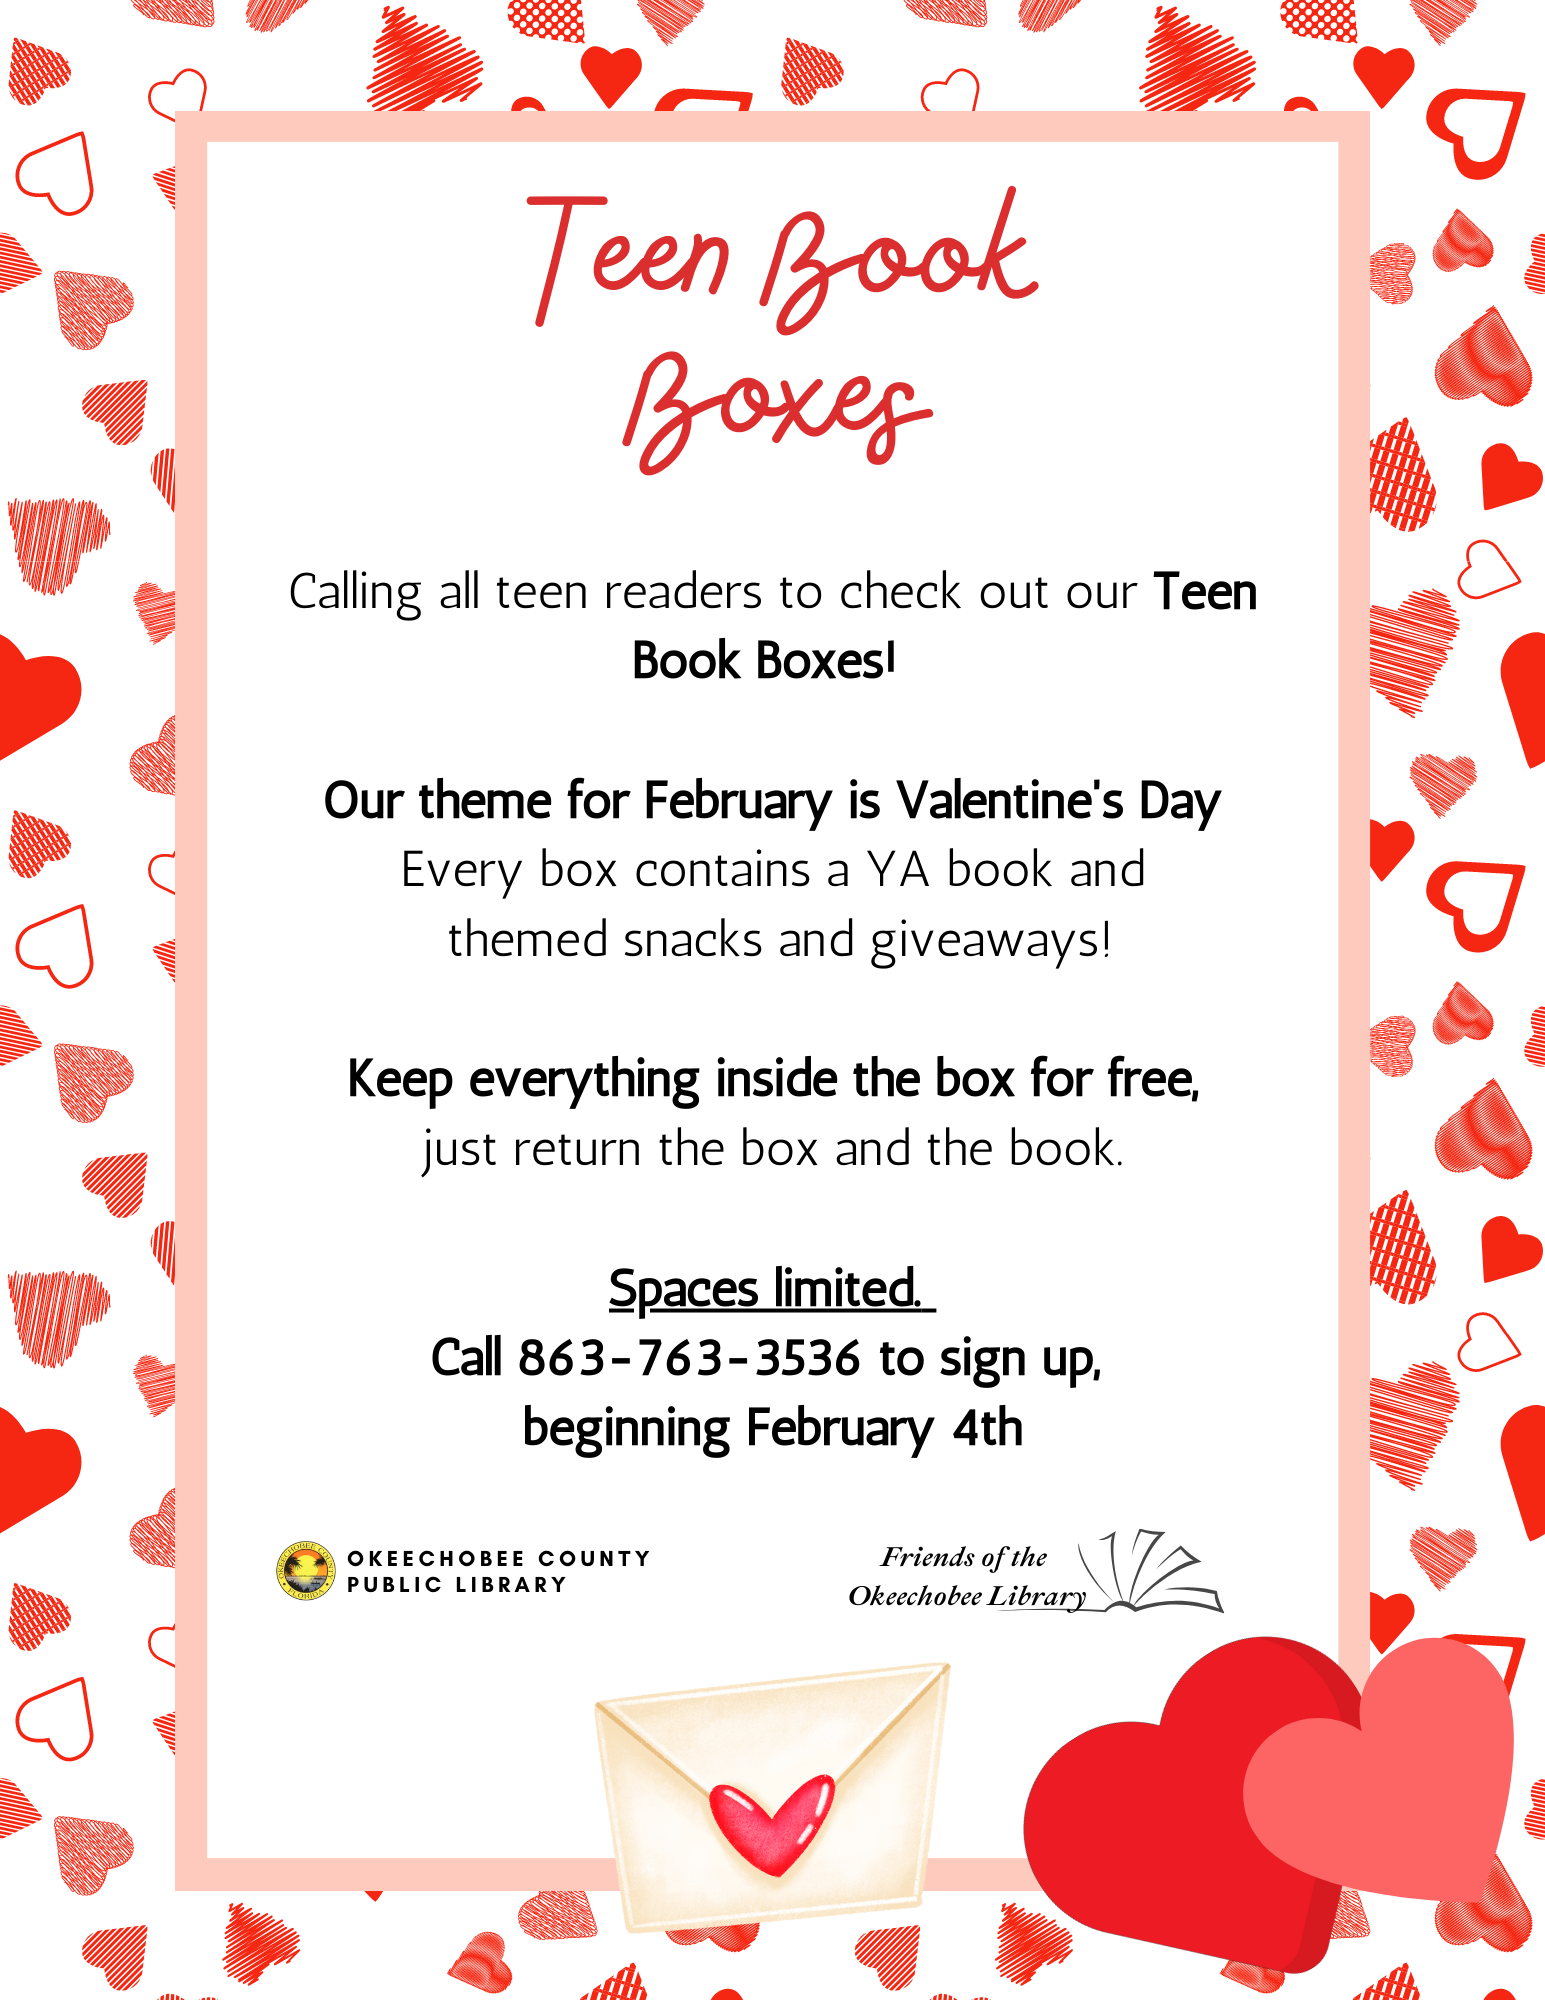 February Teen Book Boxes! Open to all teens, get free prizes and snacks just for checking out a book!